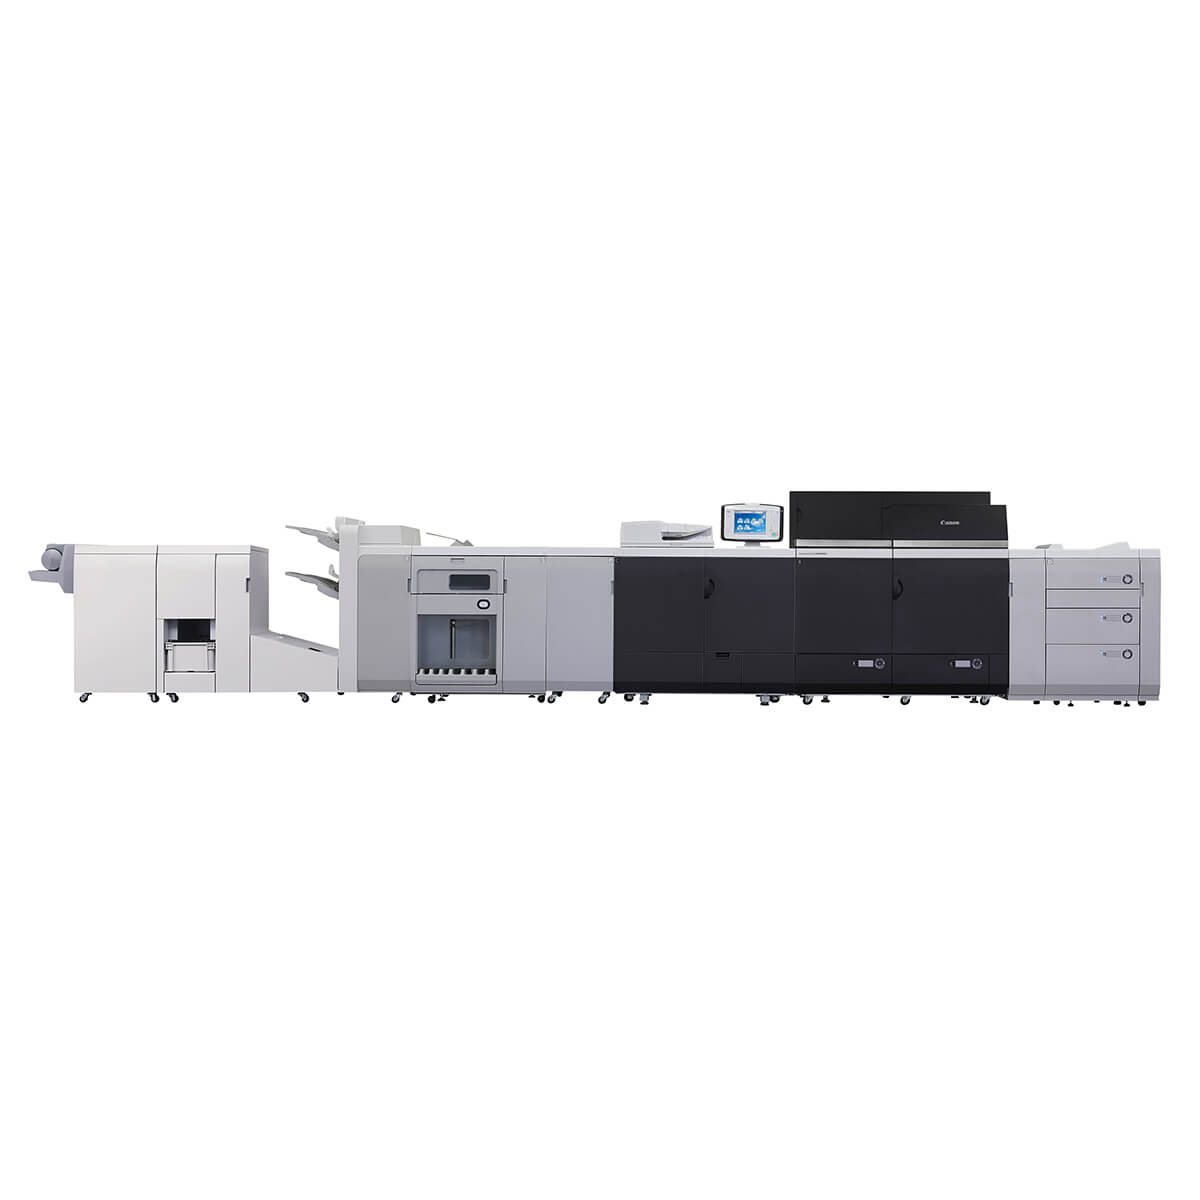 imagePRESS C9010VP is an outstanding colour digital press for fast, versatile and affordable print